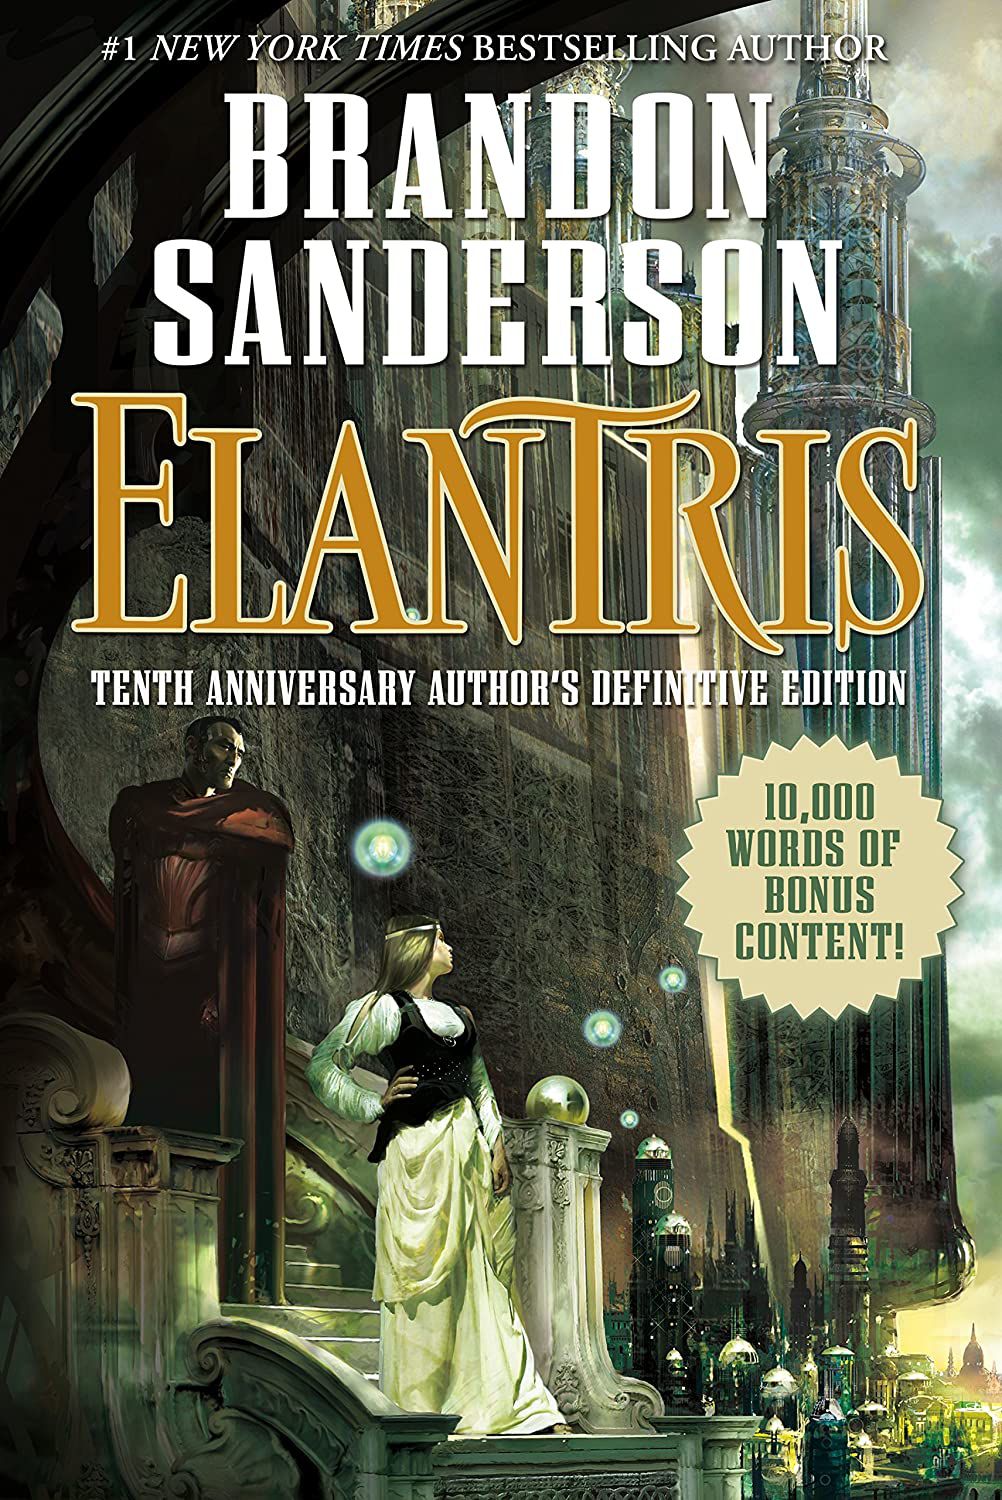 A 10th anniversary book cover for Elantris shows a woman standing on steps while looking at a city off in the distance.